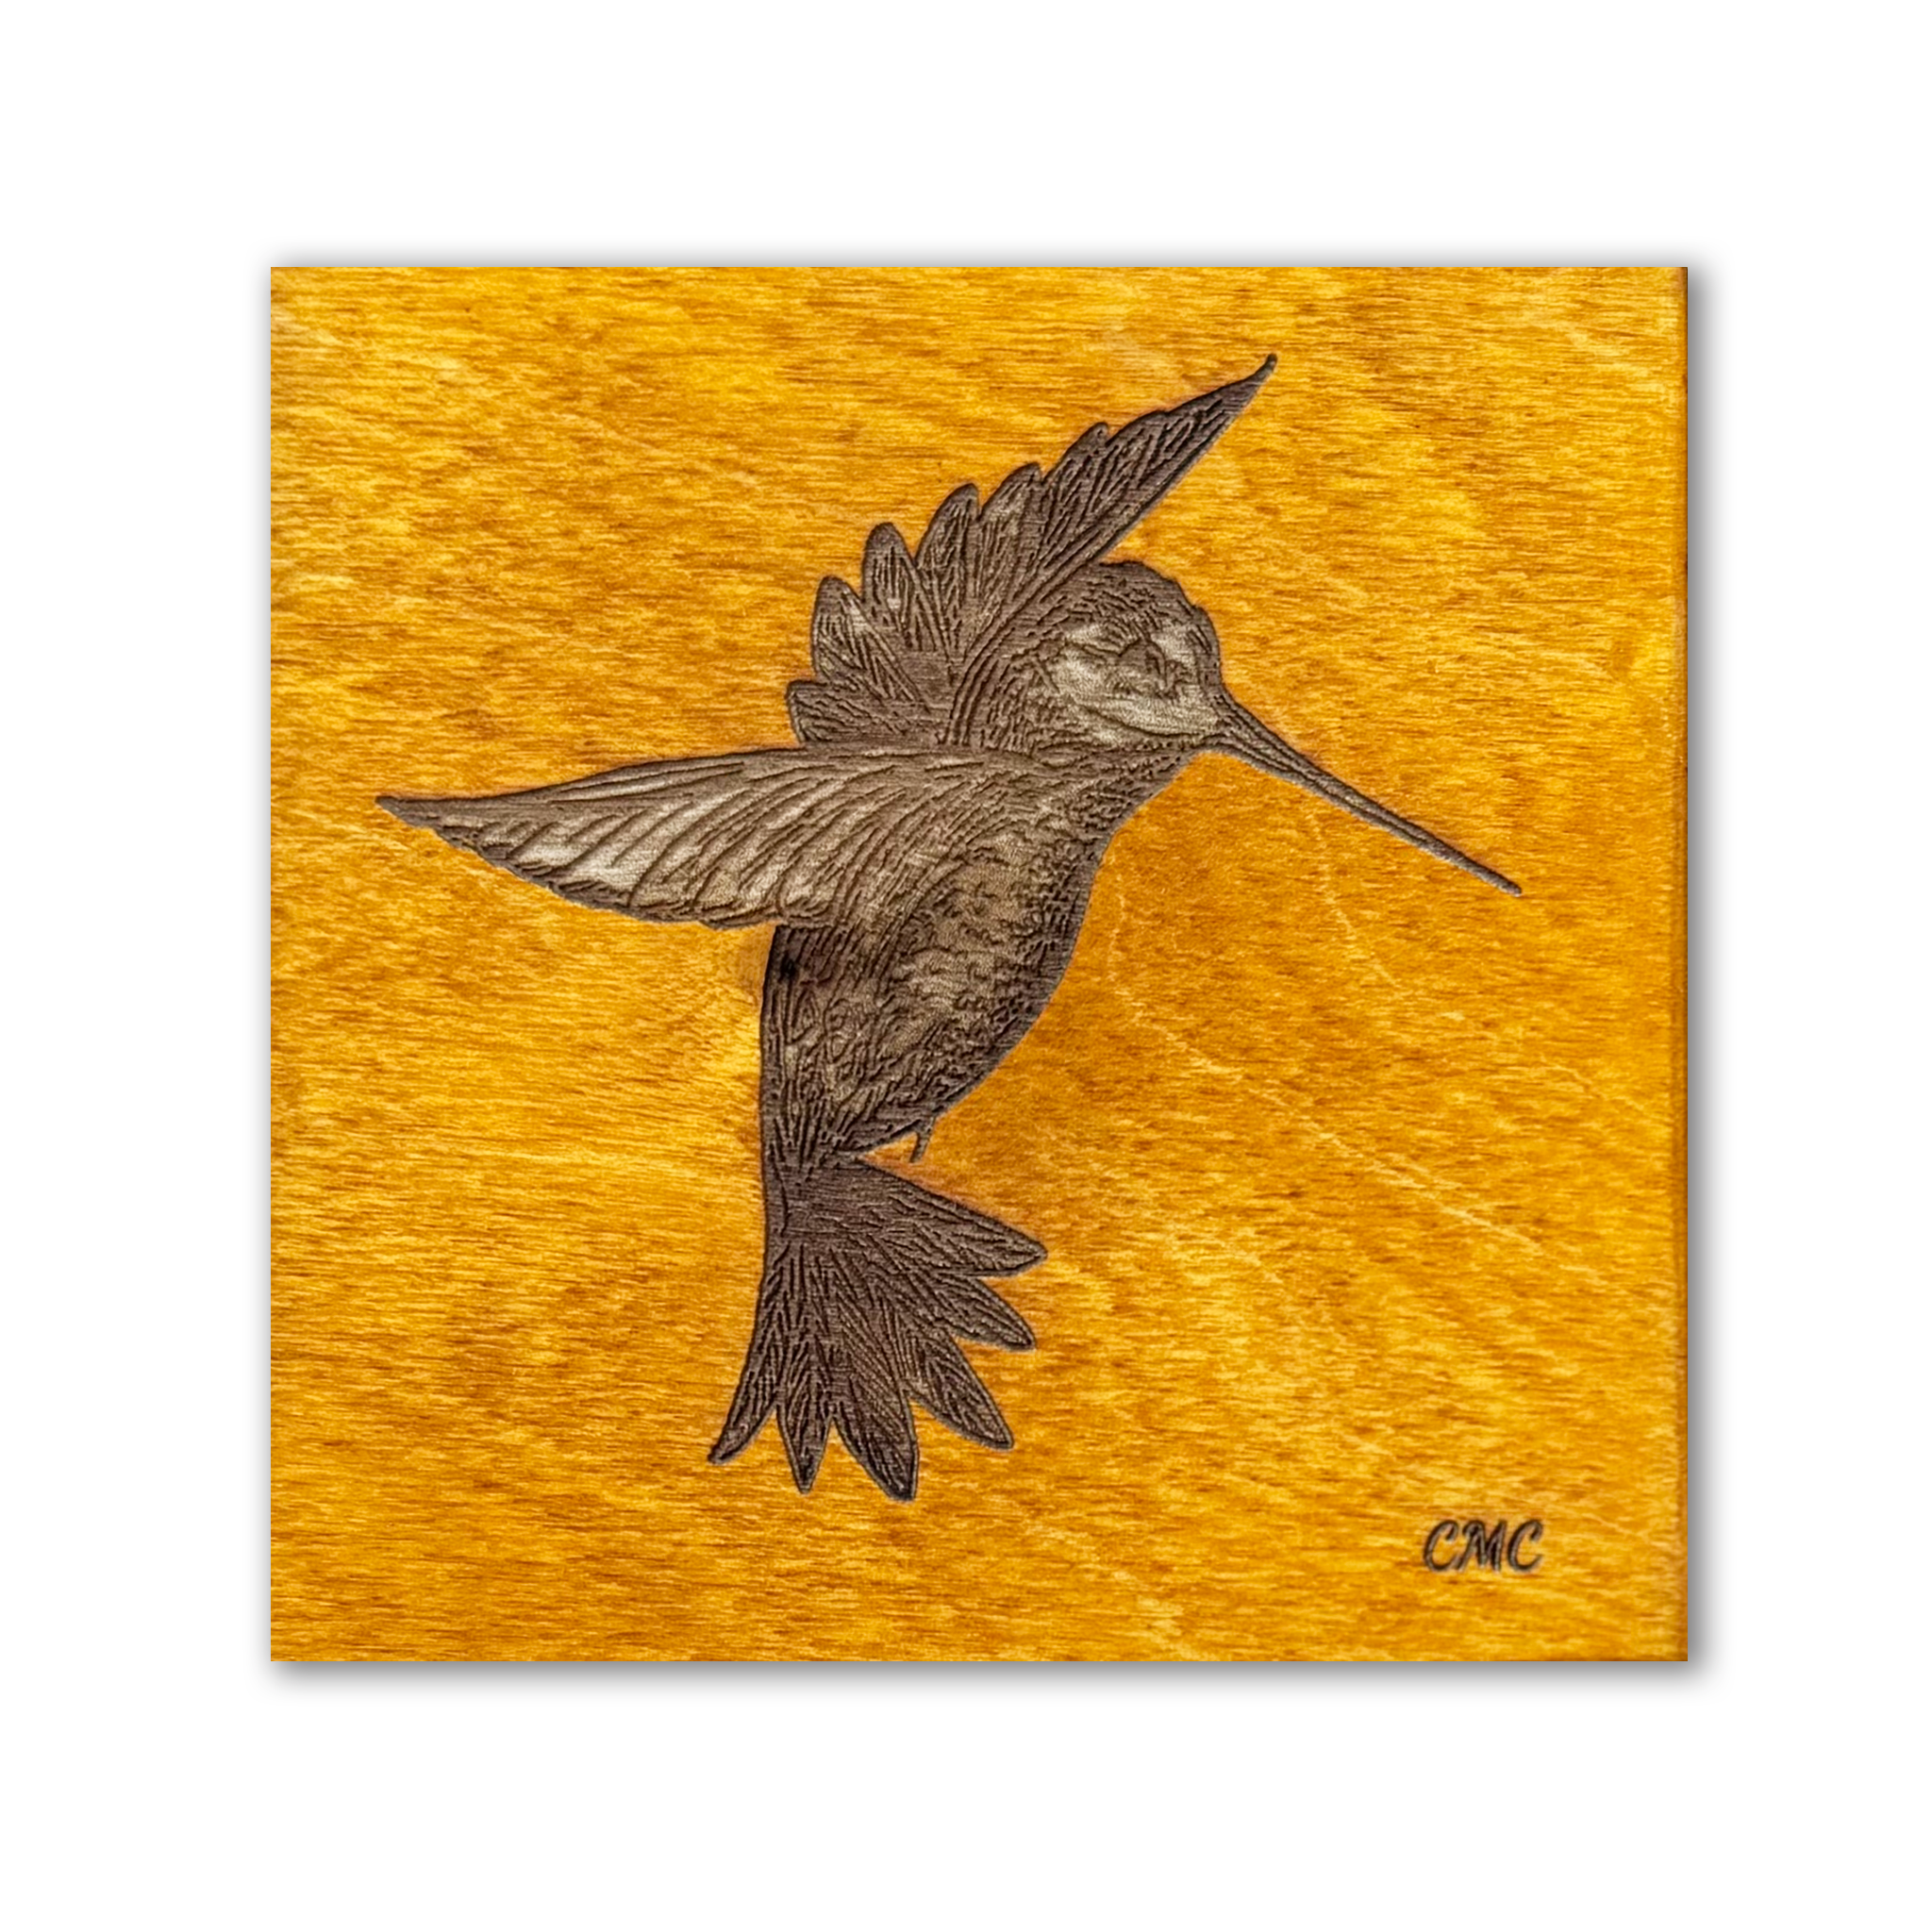 Laser engraved hovering hummingbird on amber stained baltic birch tile